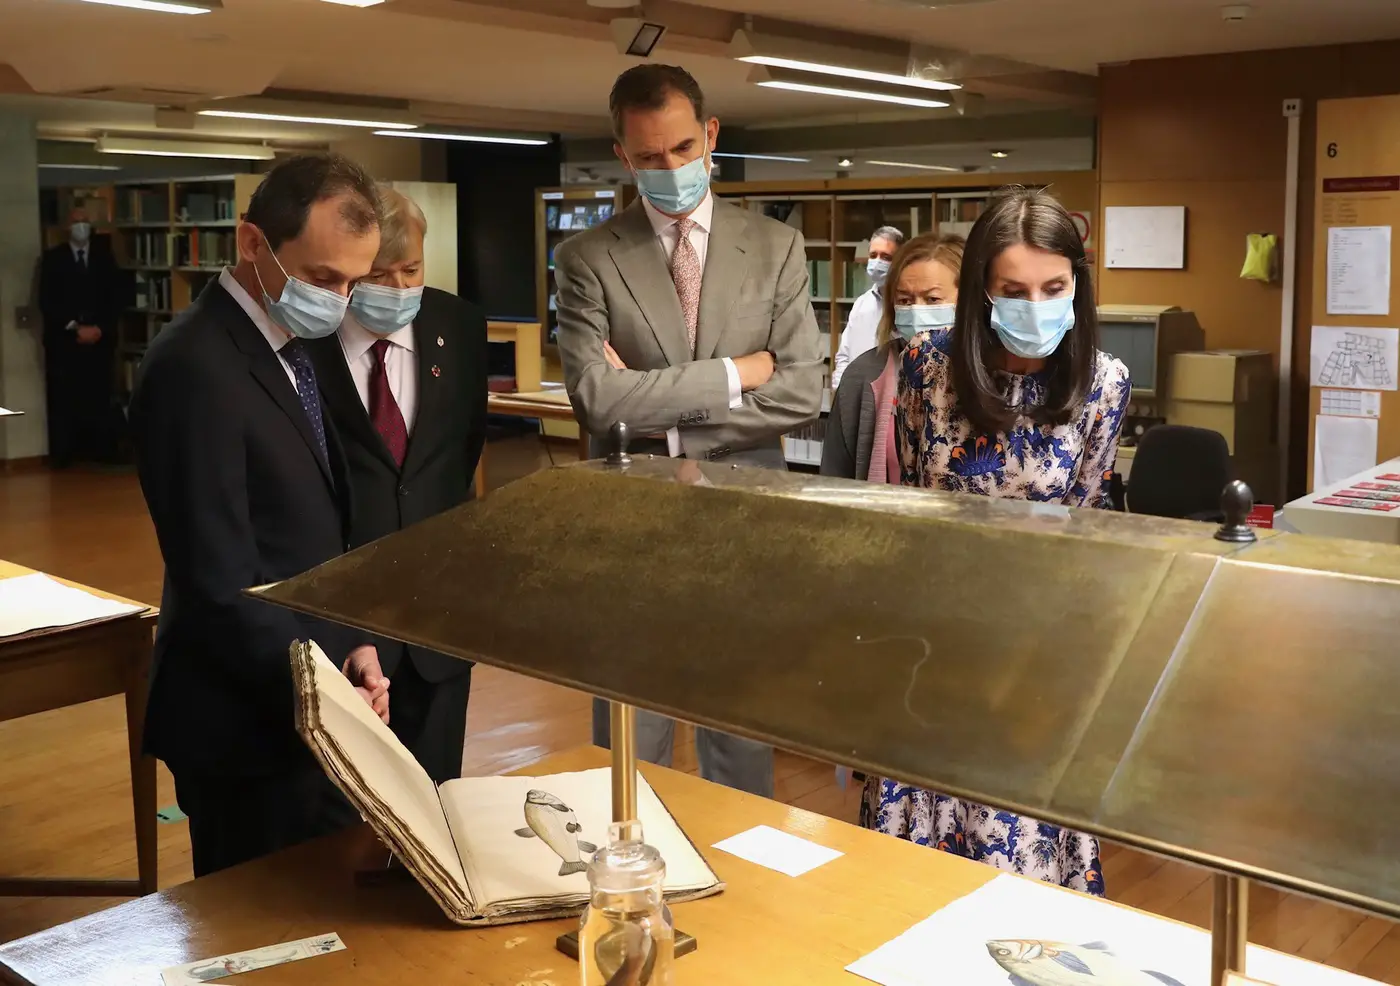 Felipe and Letizia toured the natural sciences museums